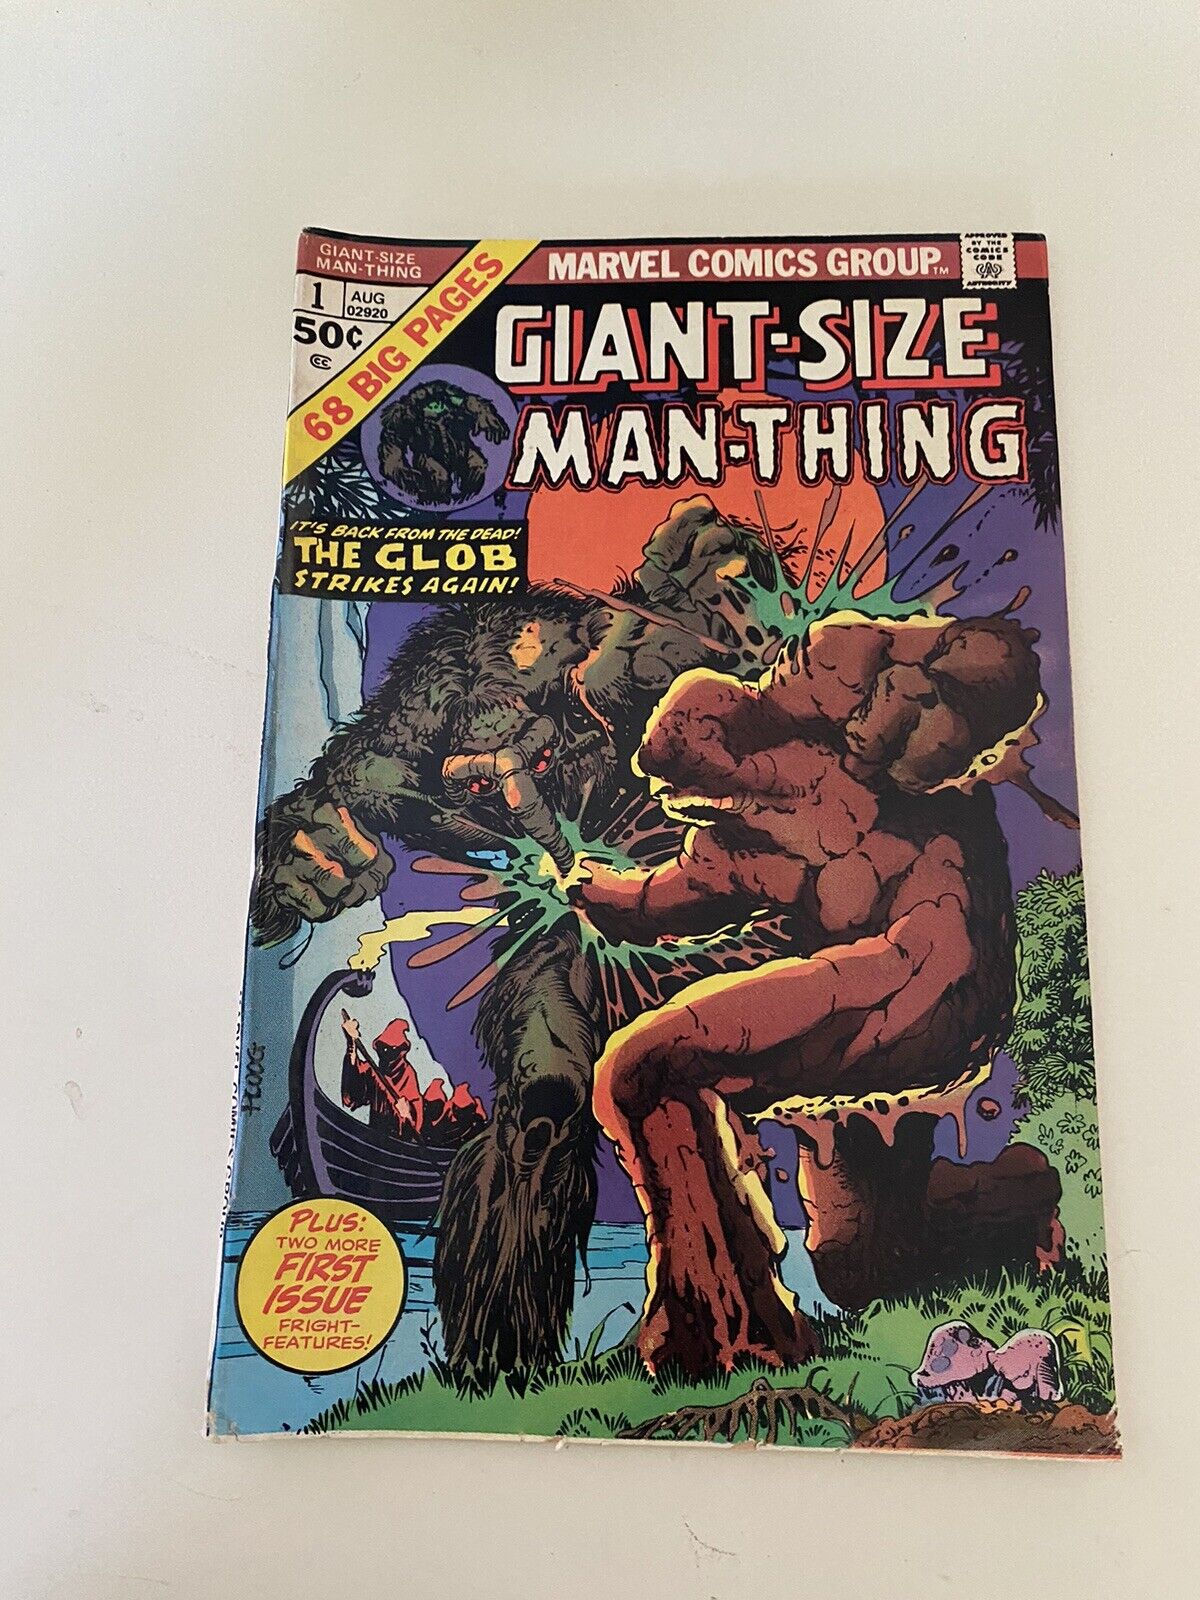 Giant-Size Man-Thing (1974-1975) #1